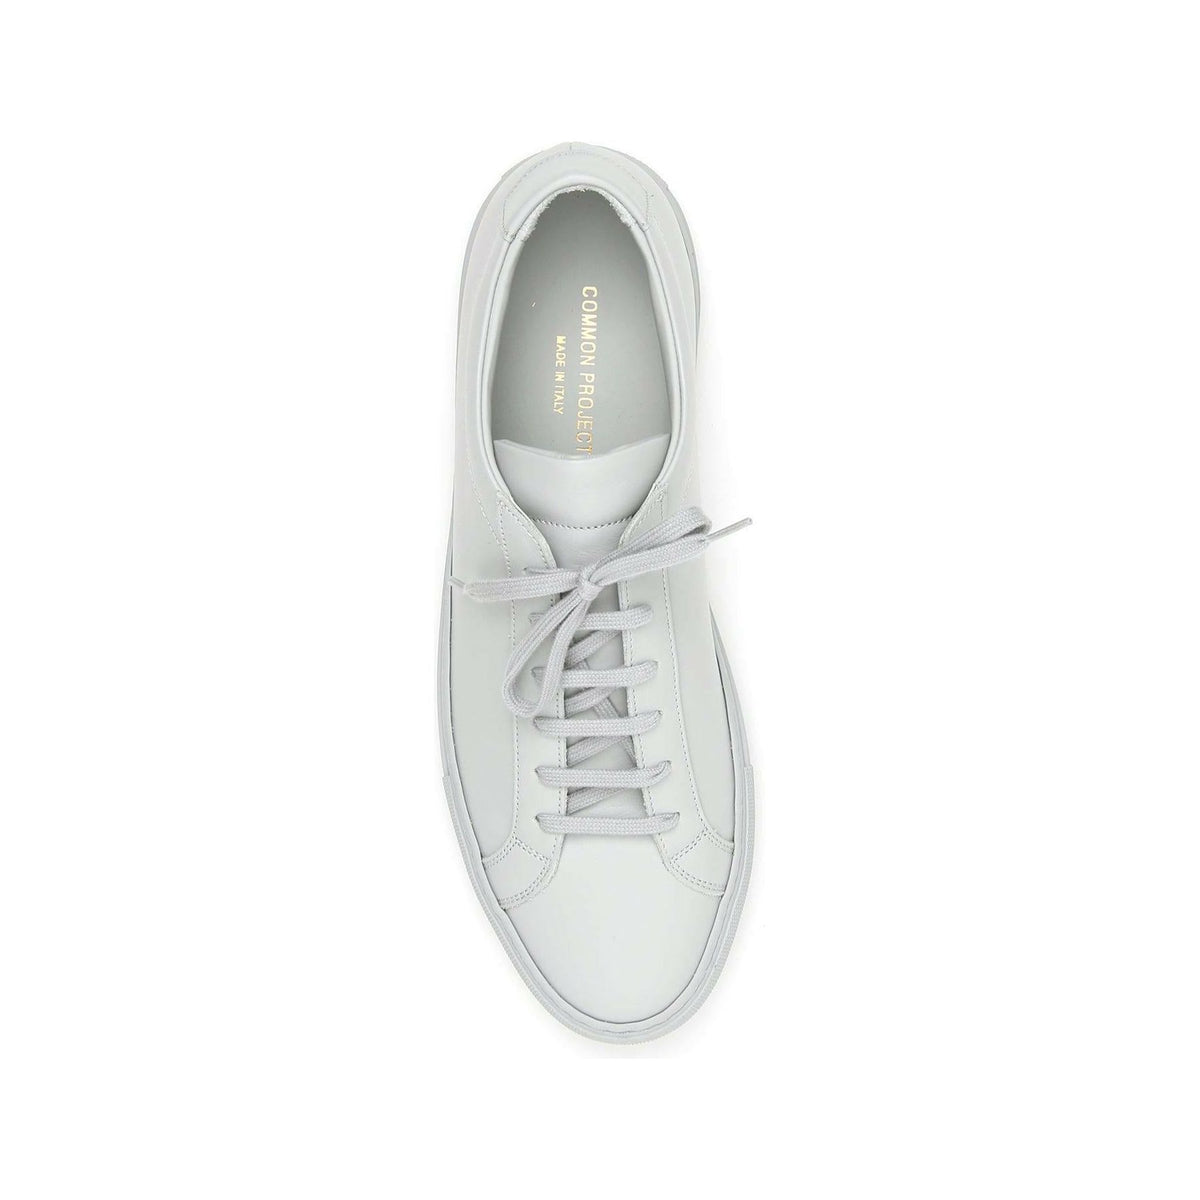 COMMON PROJECTS - Grey Original Achilles Low-Top Leather Sneakers - JOHN JULIA